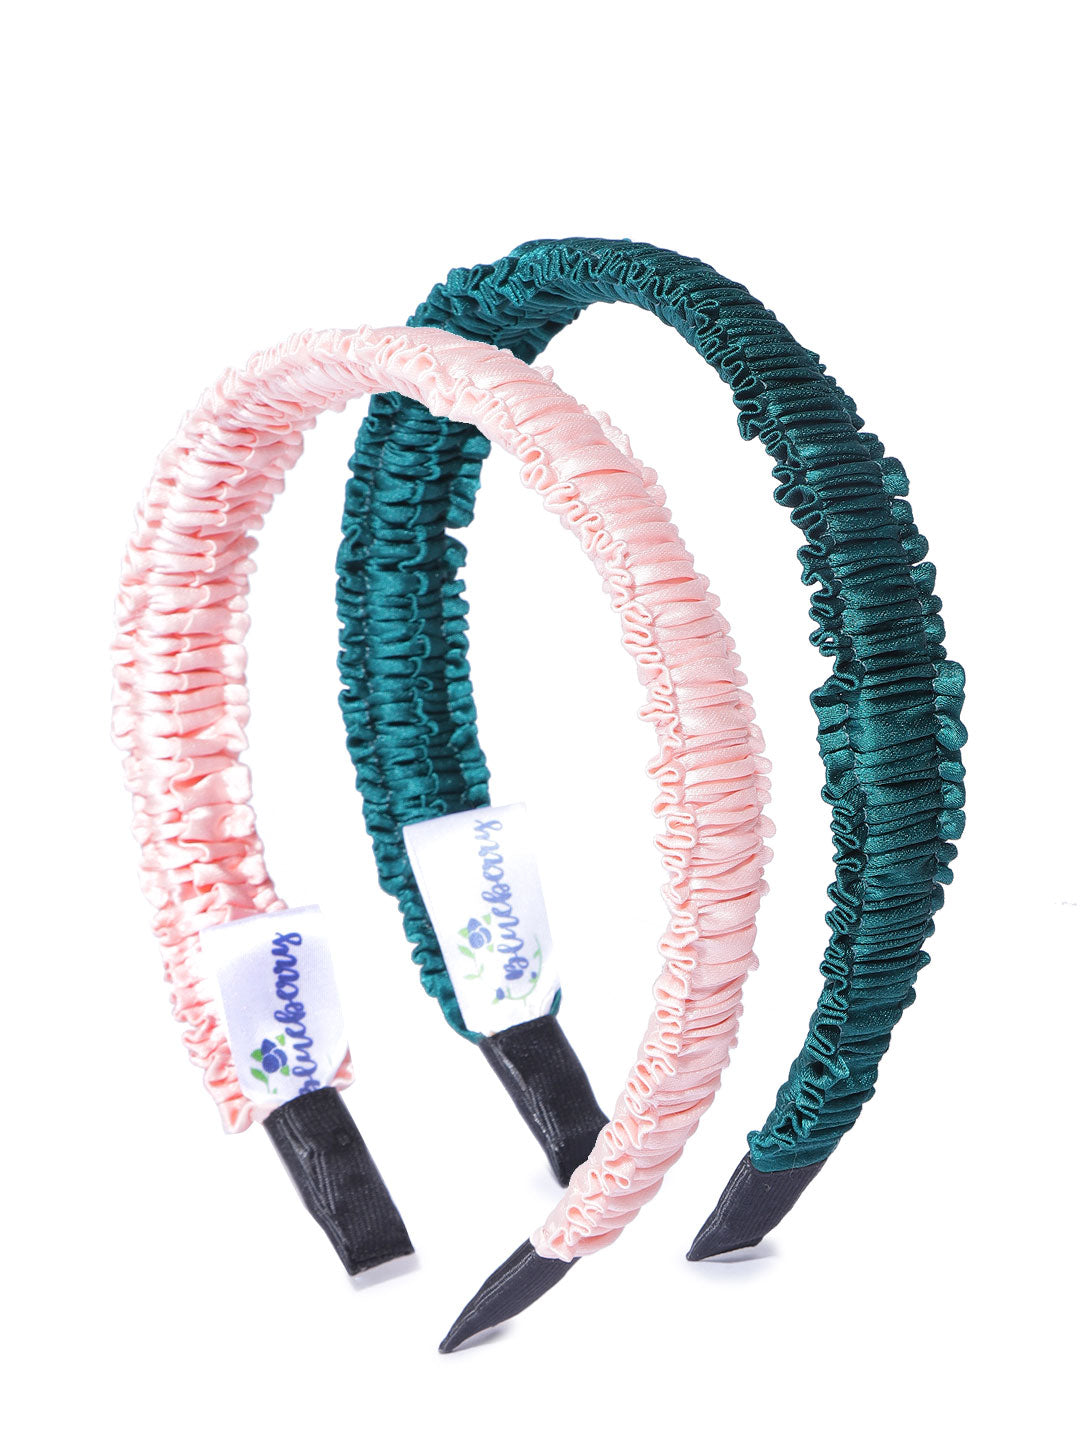 Blueberry KIDS set of 2 pleated green and peach hair band